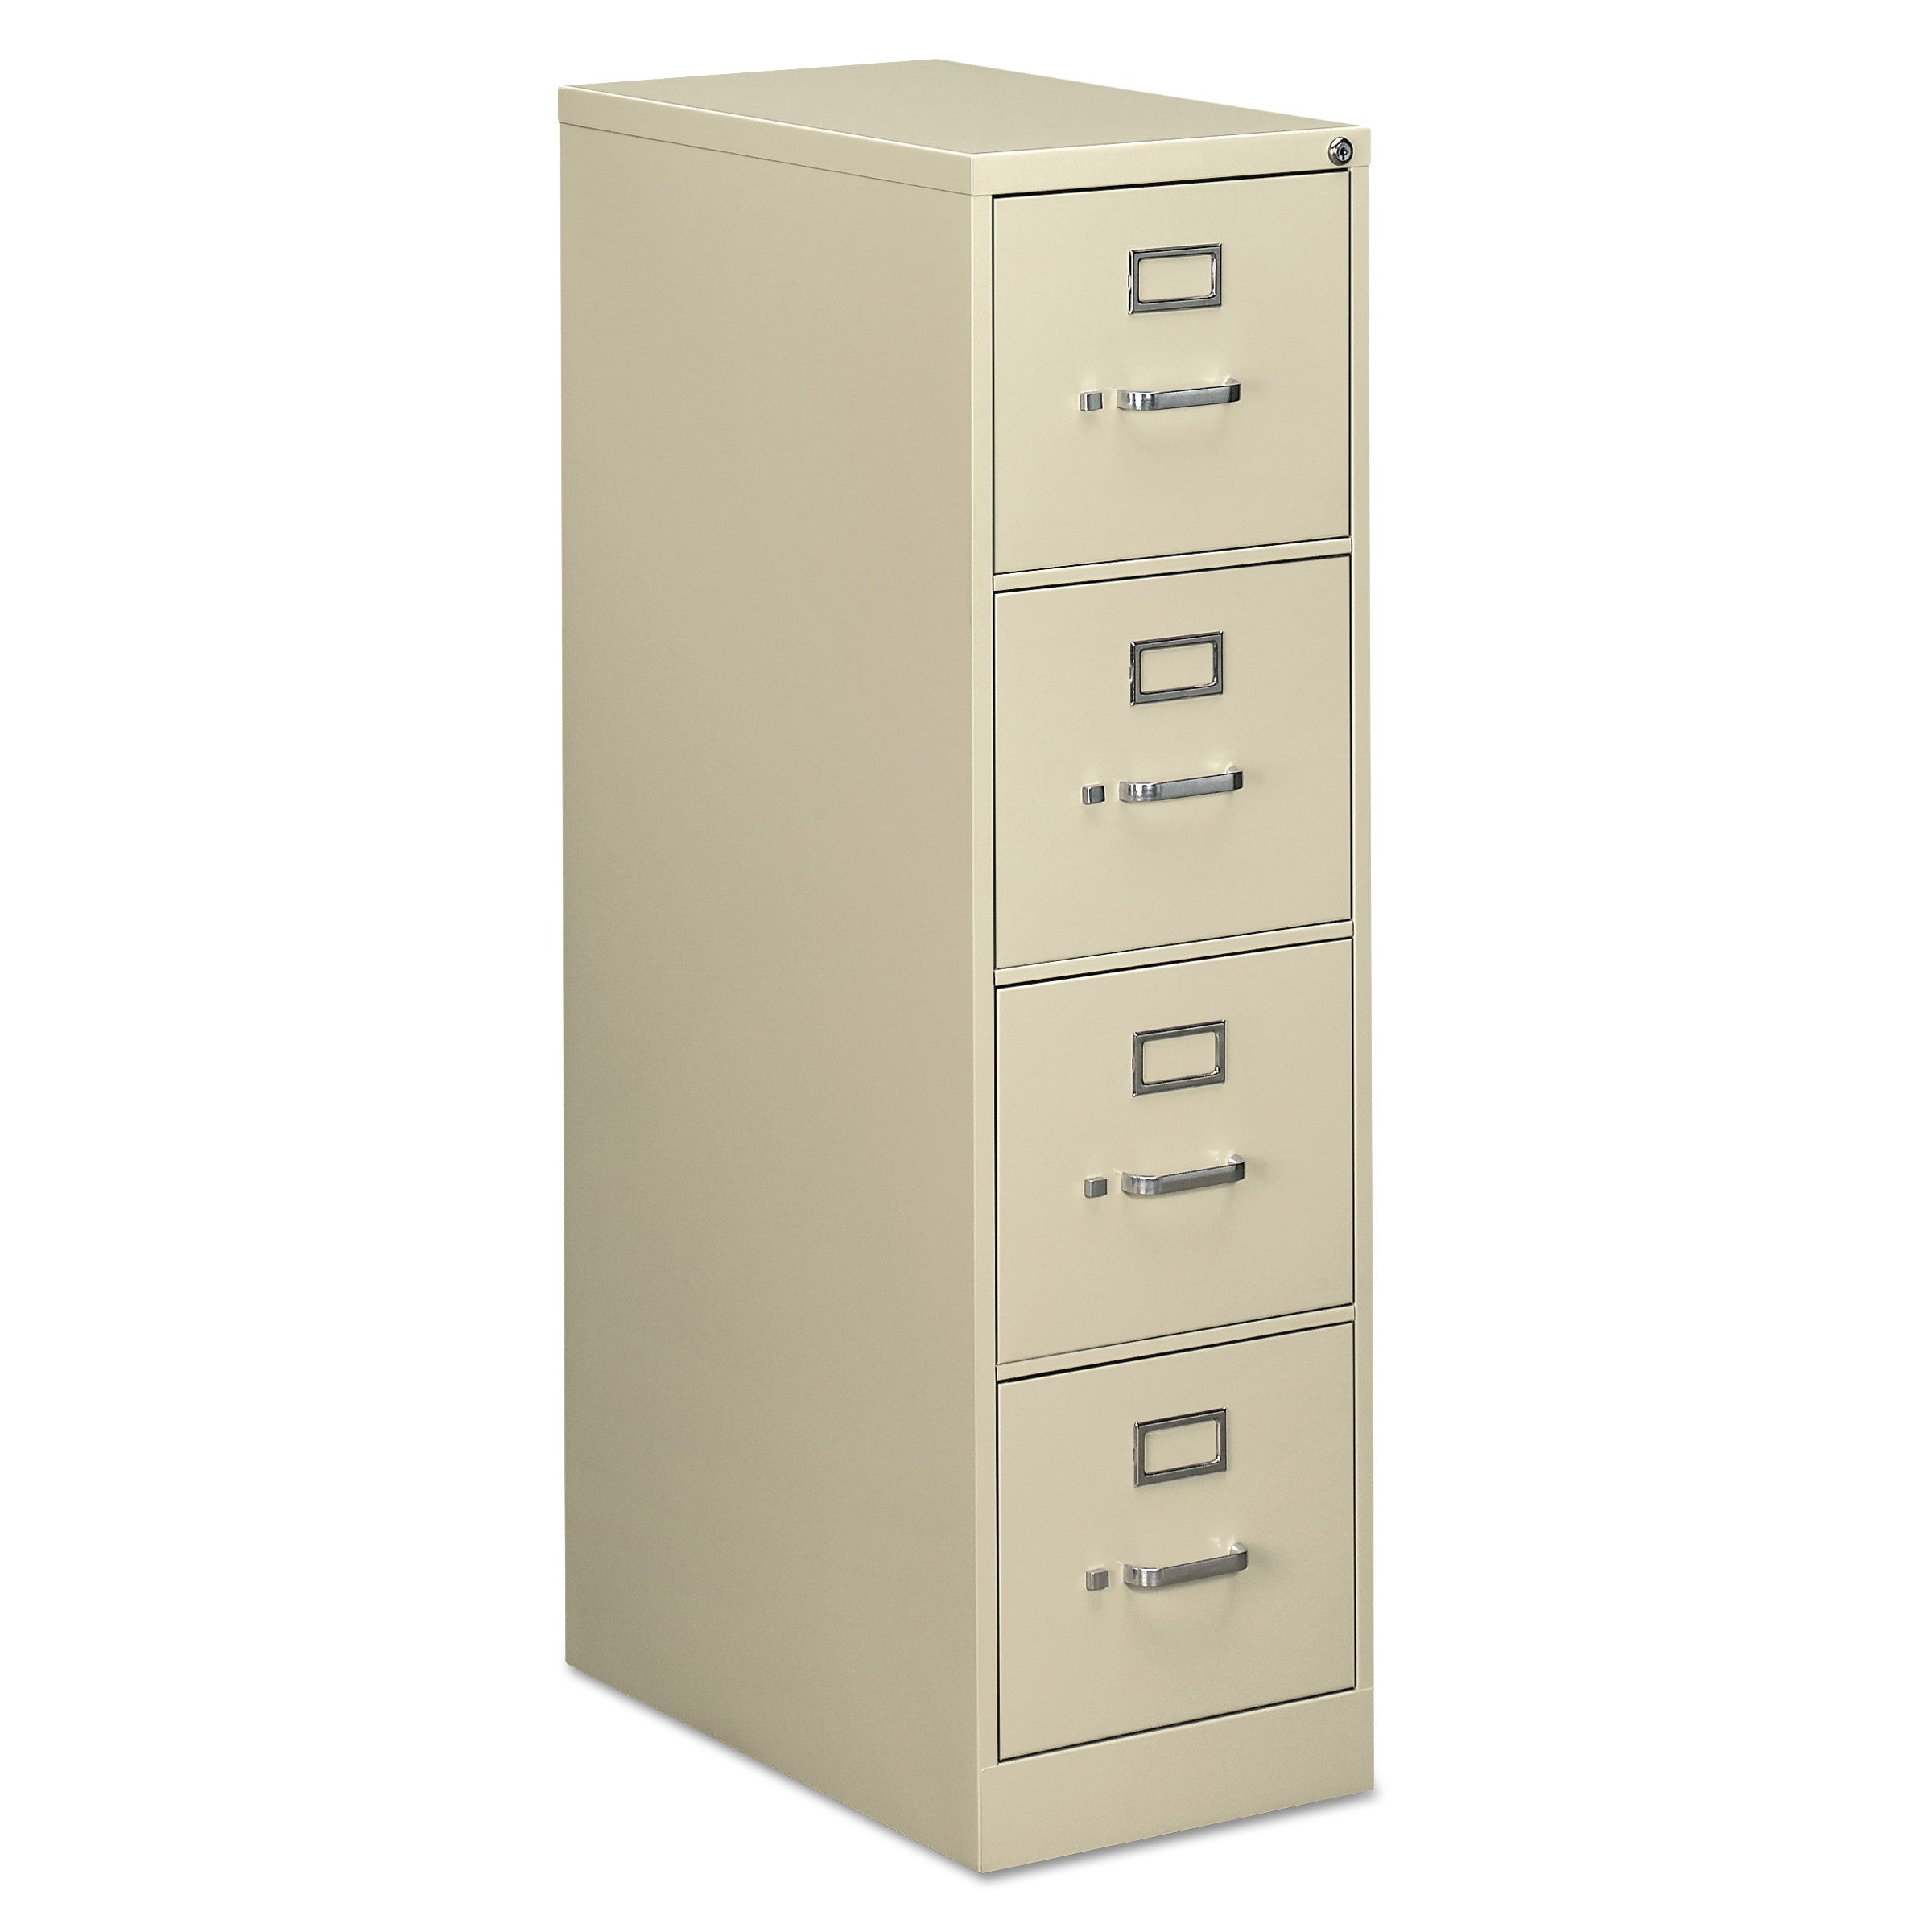 economy-vertical-file-4-letter-size-file-drawers-putty-15-x-25-x-52_alehvf1552py - 1